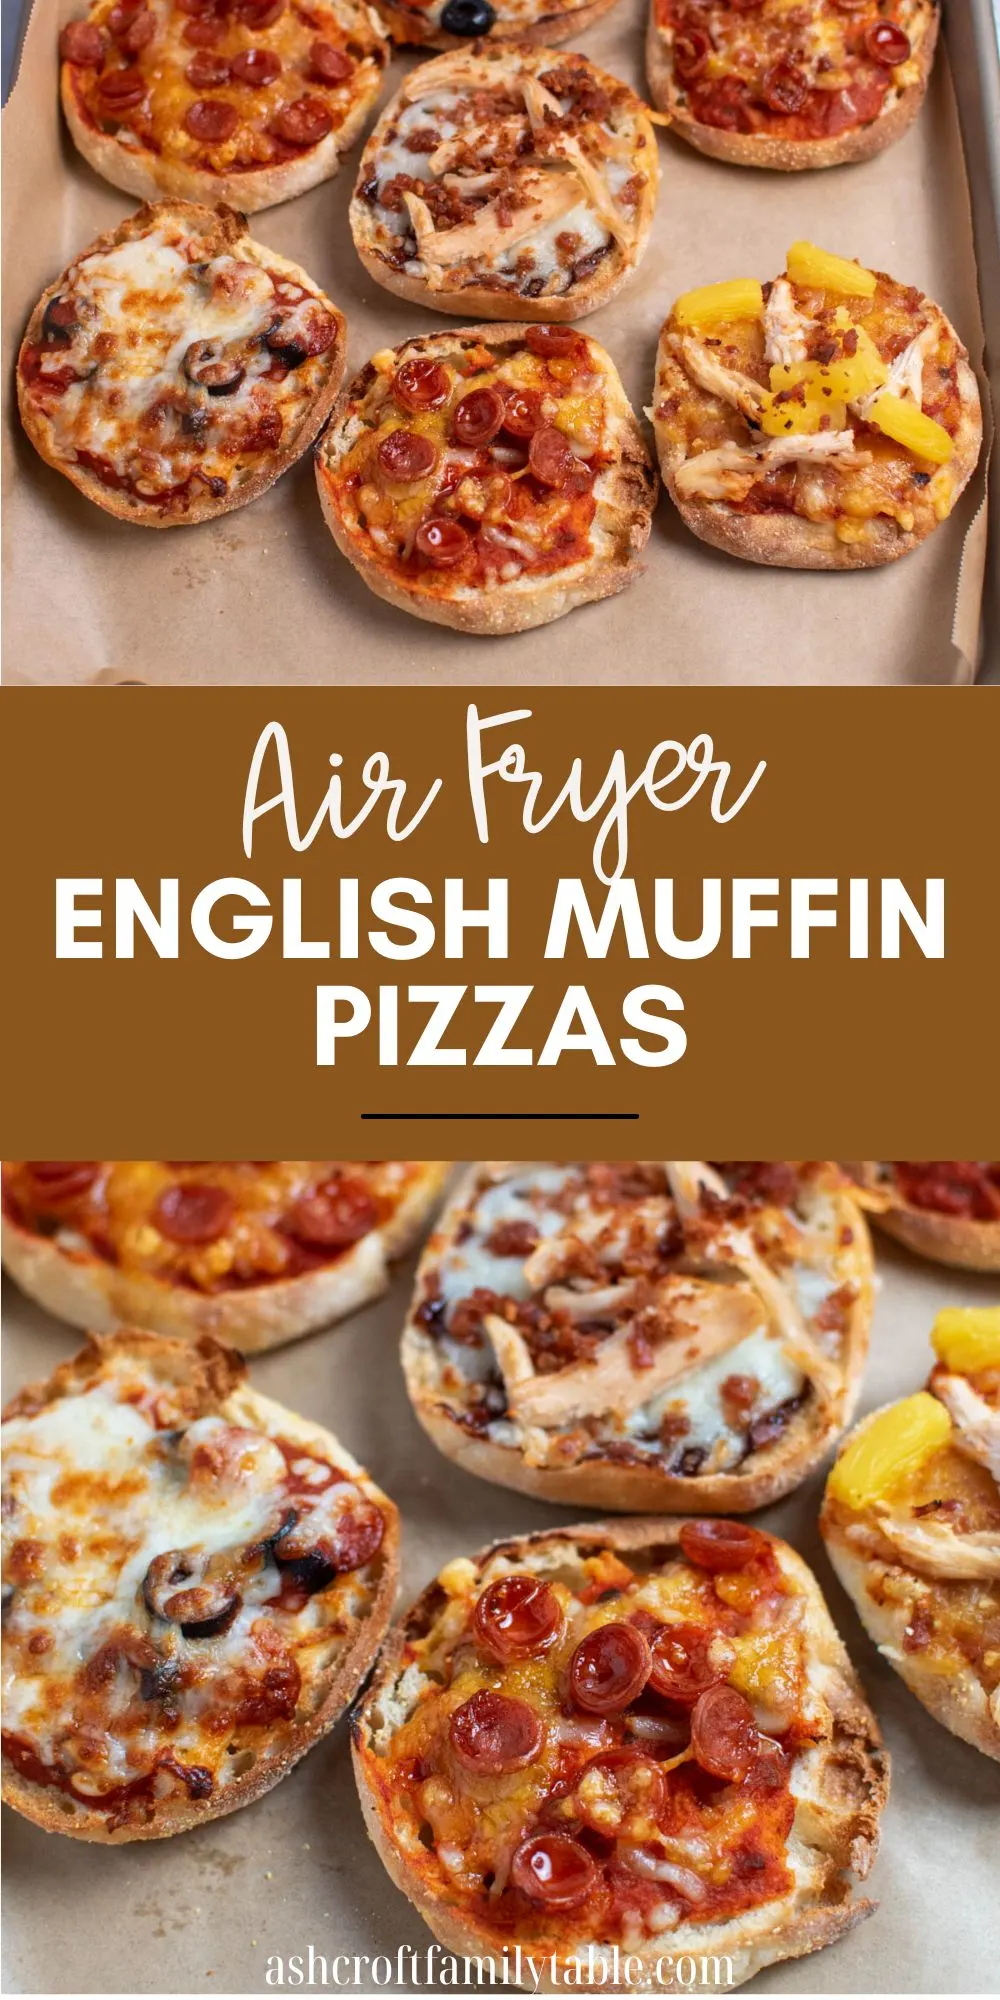 Pinterest graphic with text and photos of English muffin pizzas.